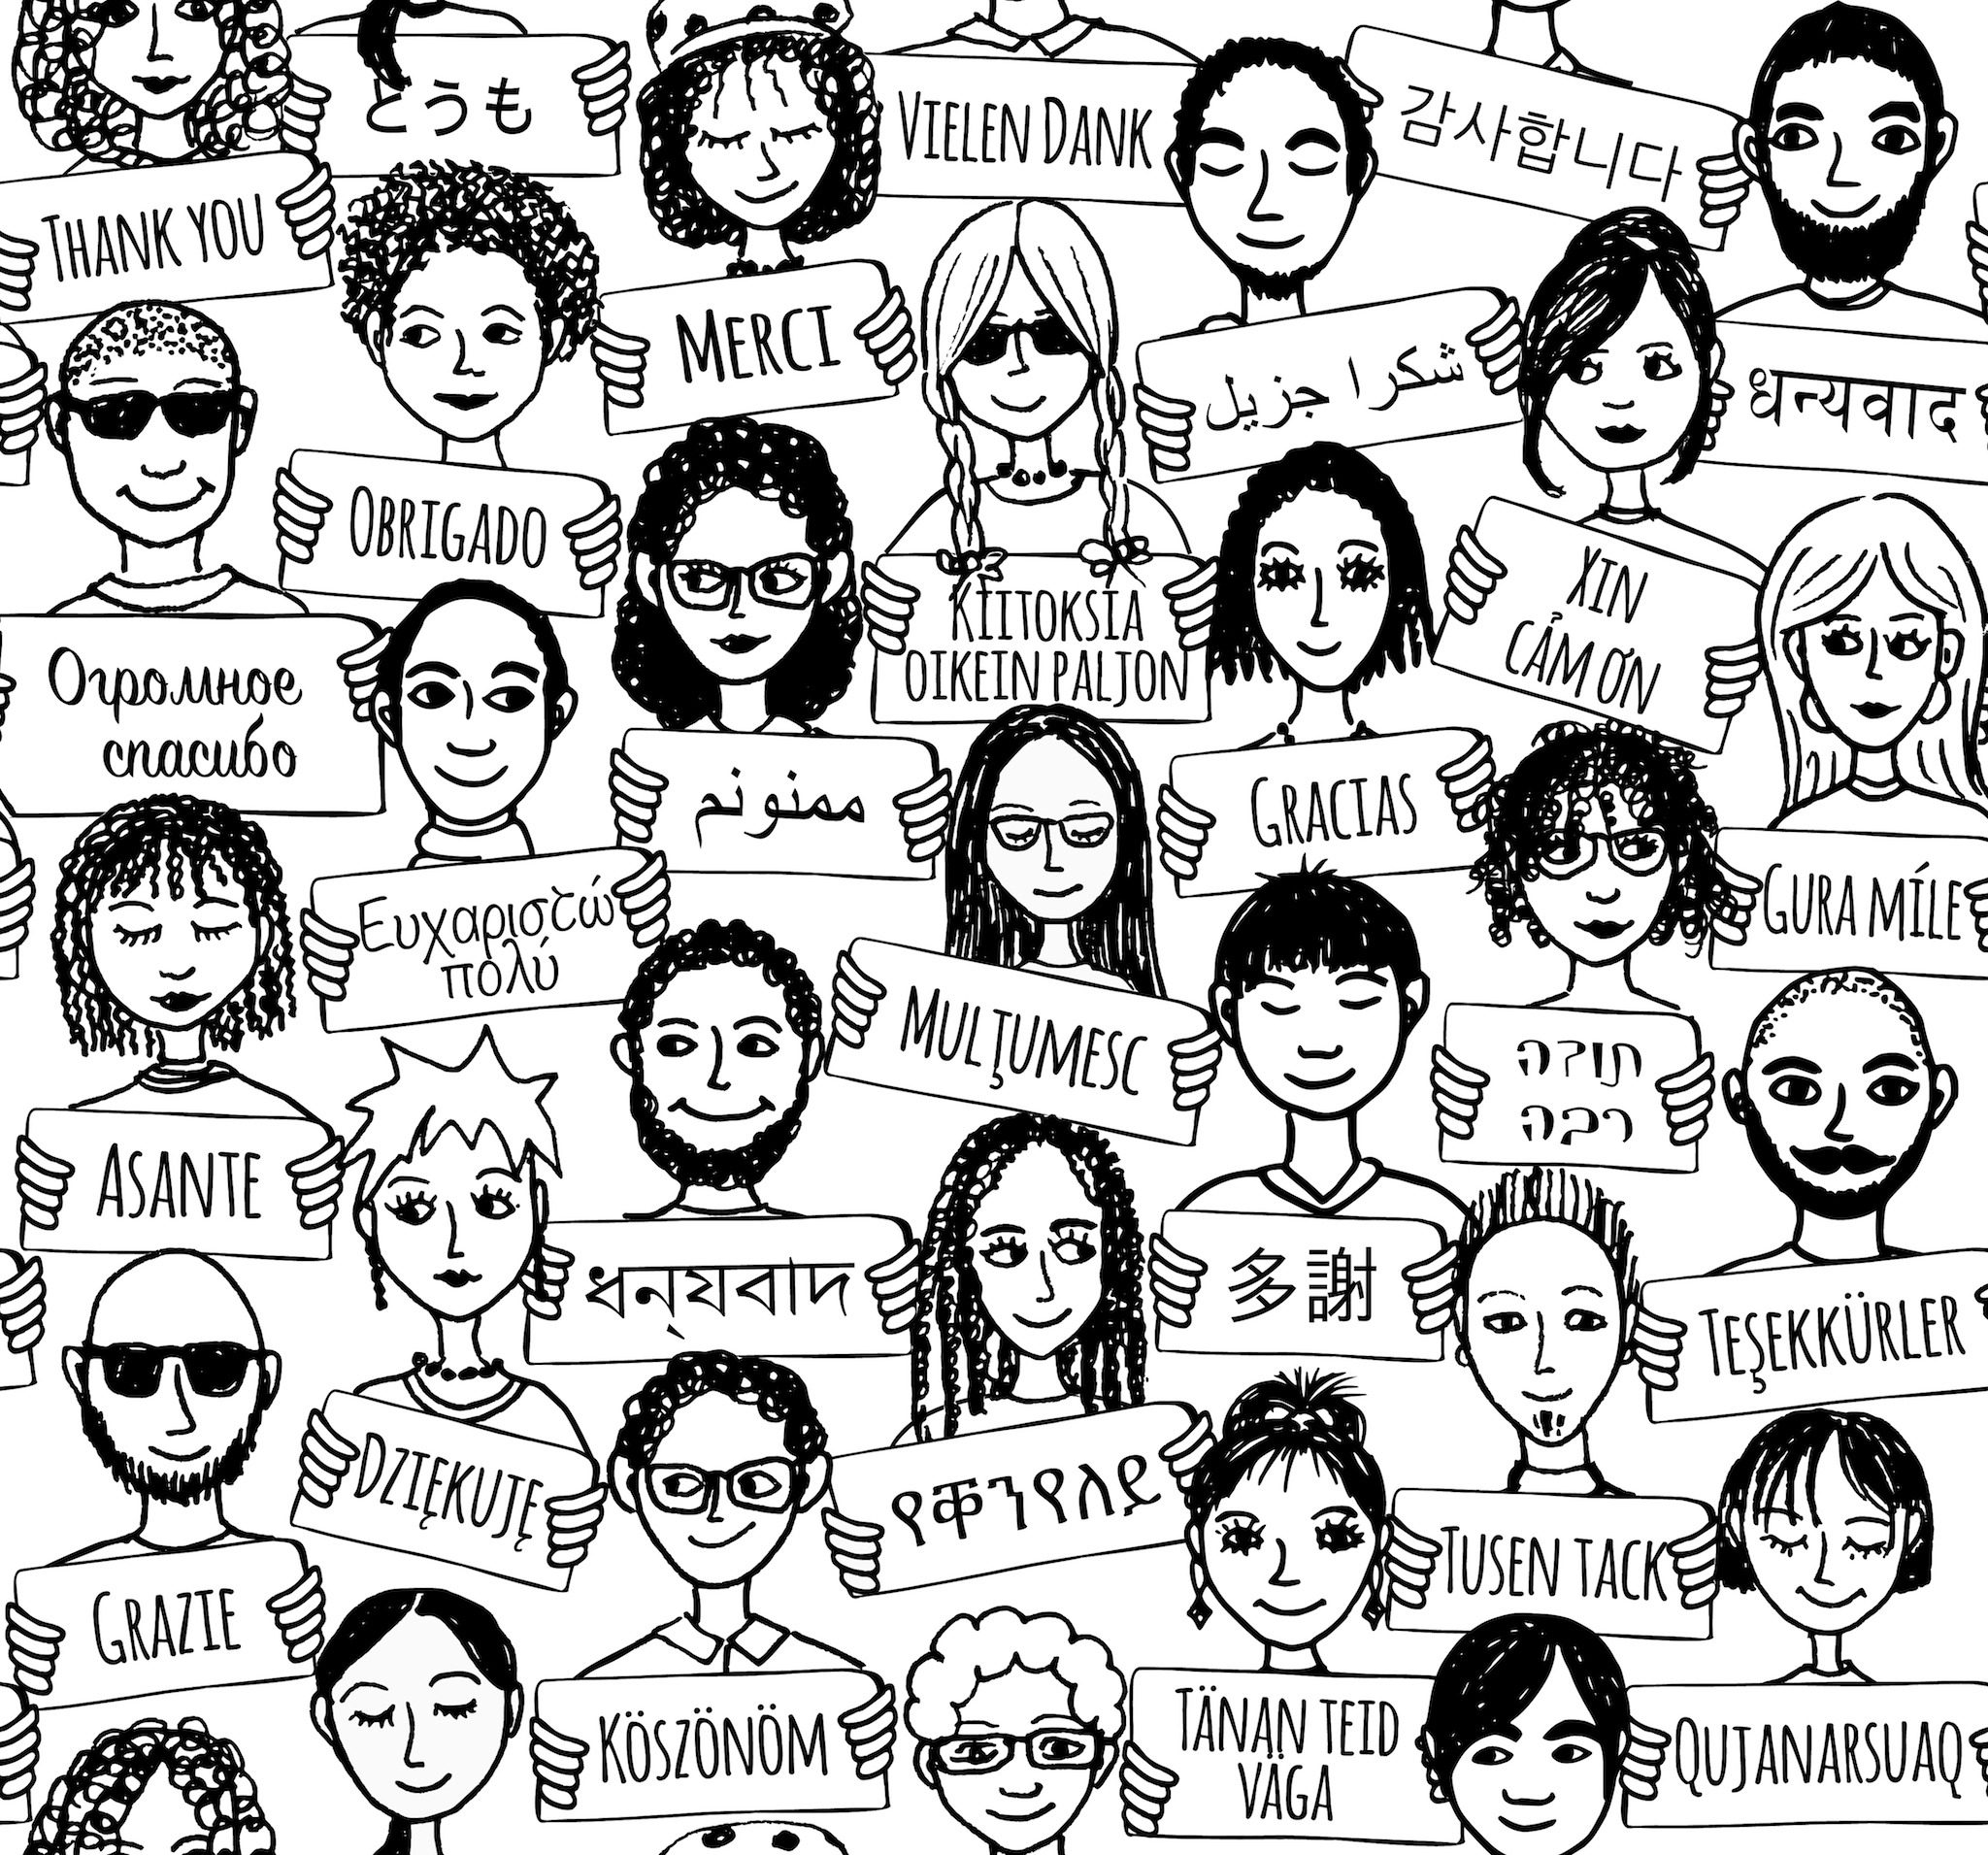 Seamless pattern of a group of hand drawn people holding "thank you" signs in different languages